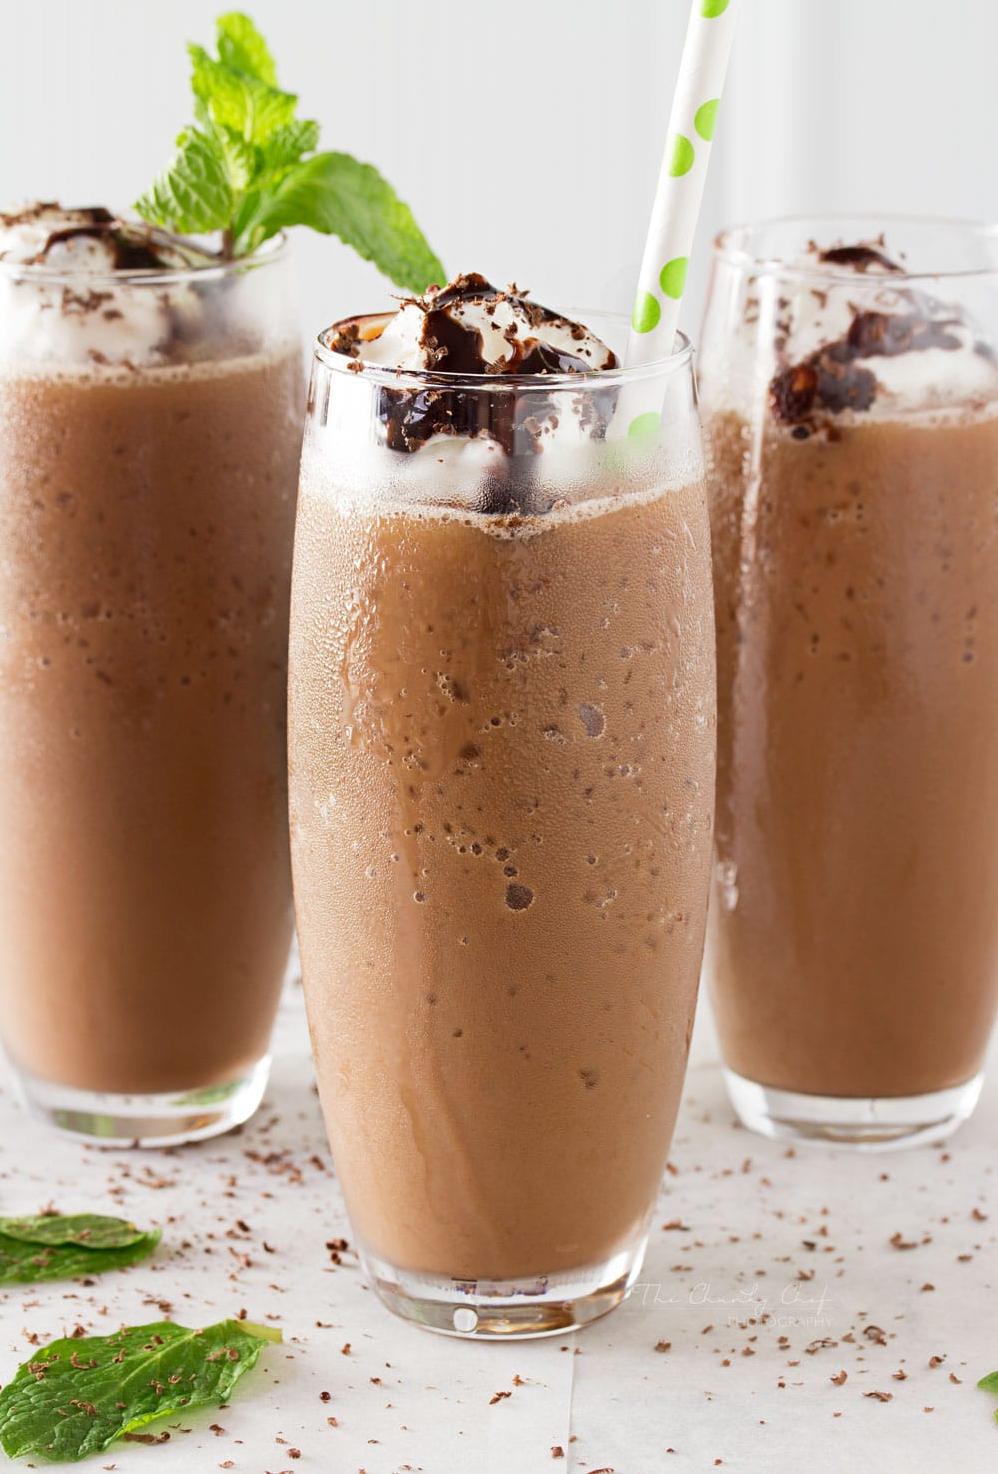  With just a few ingredients, you'll have a homemade frappe that rivals any coffee shop's version.